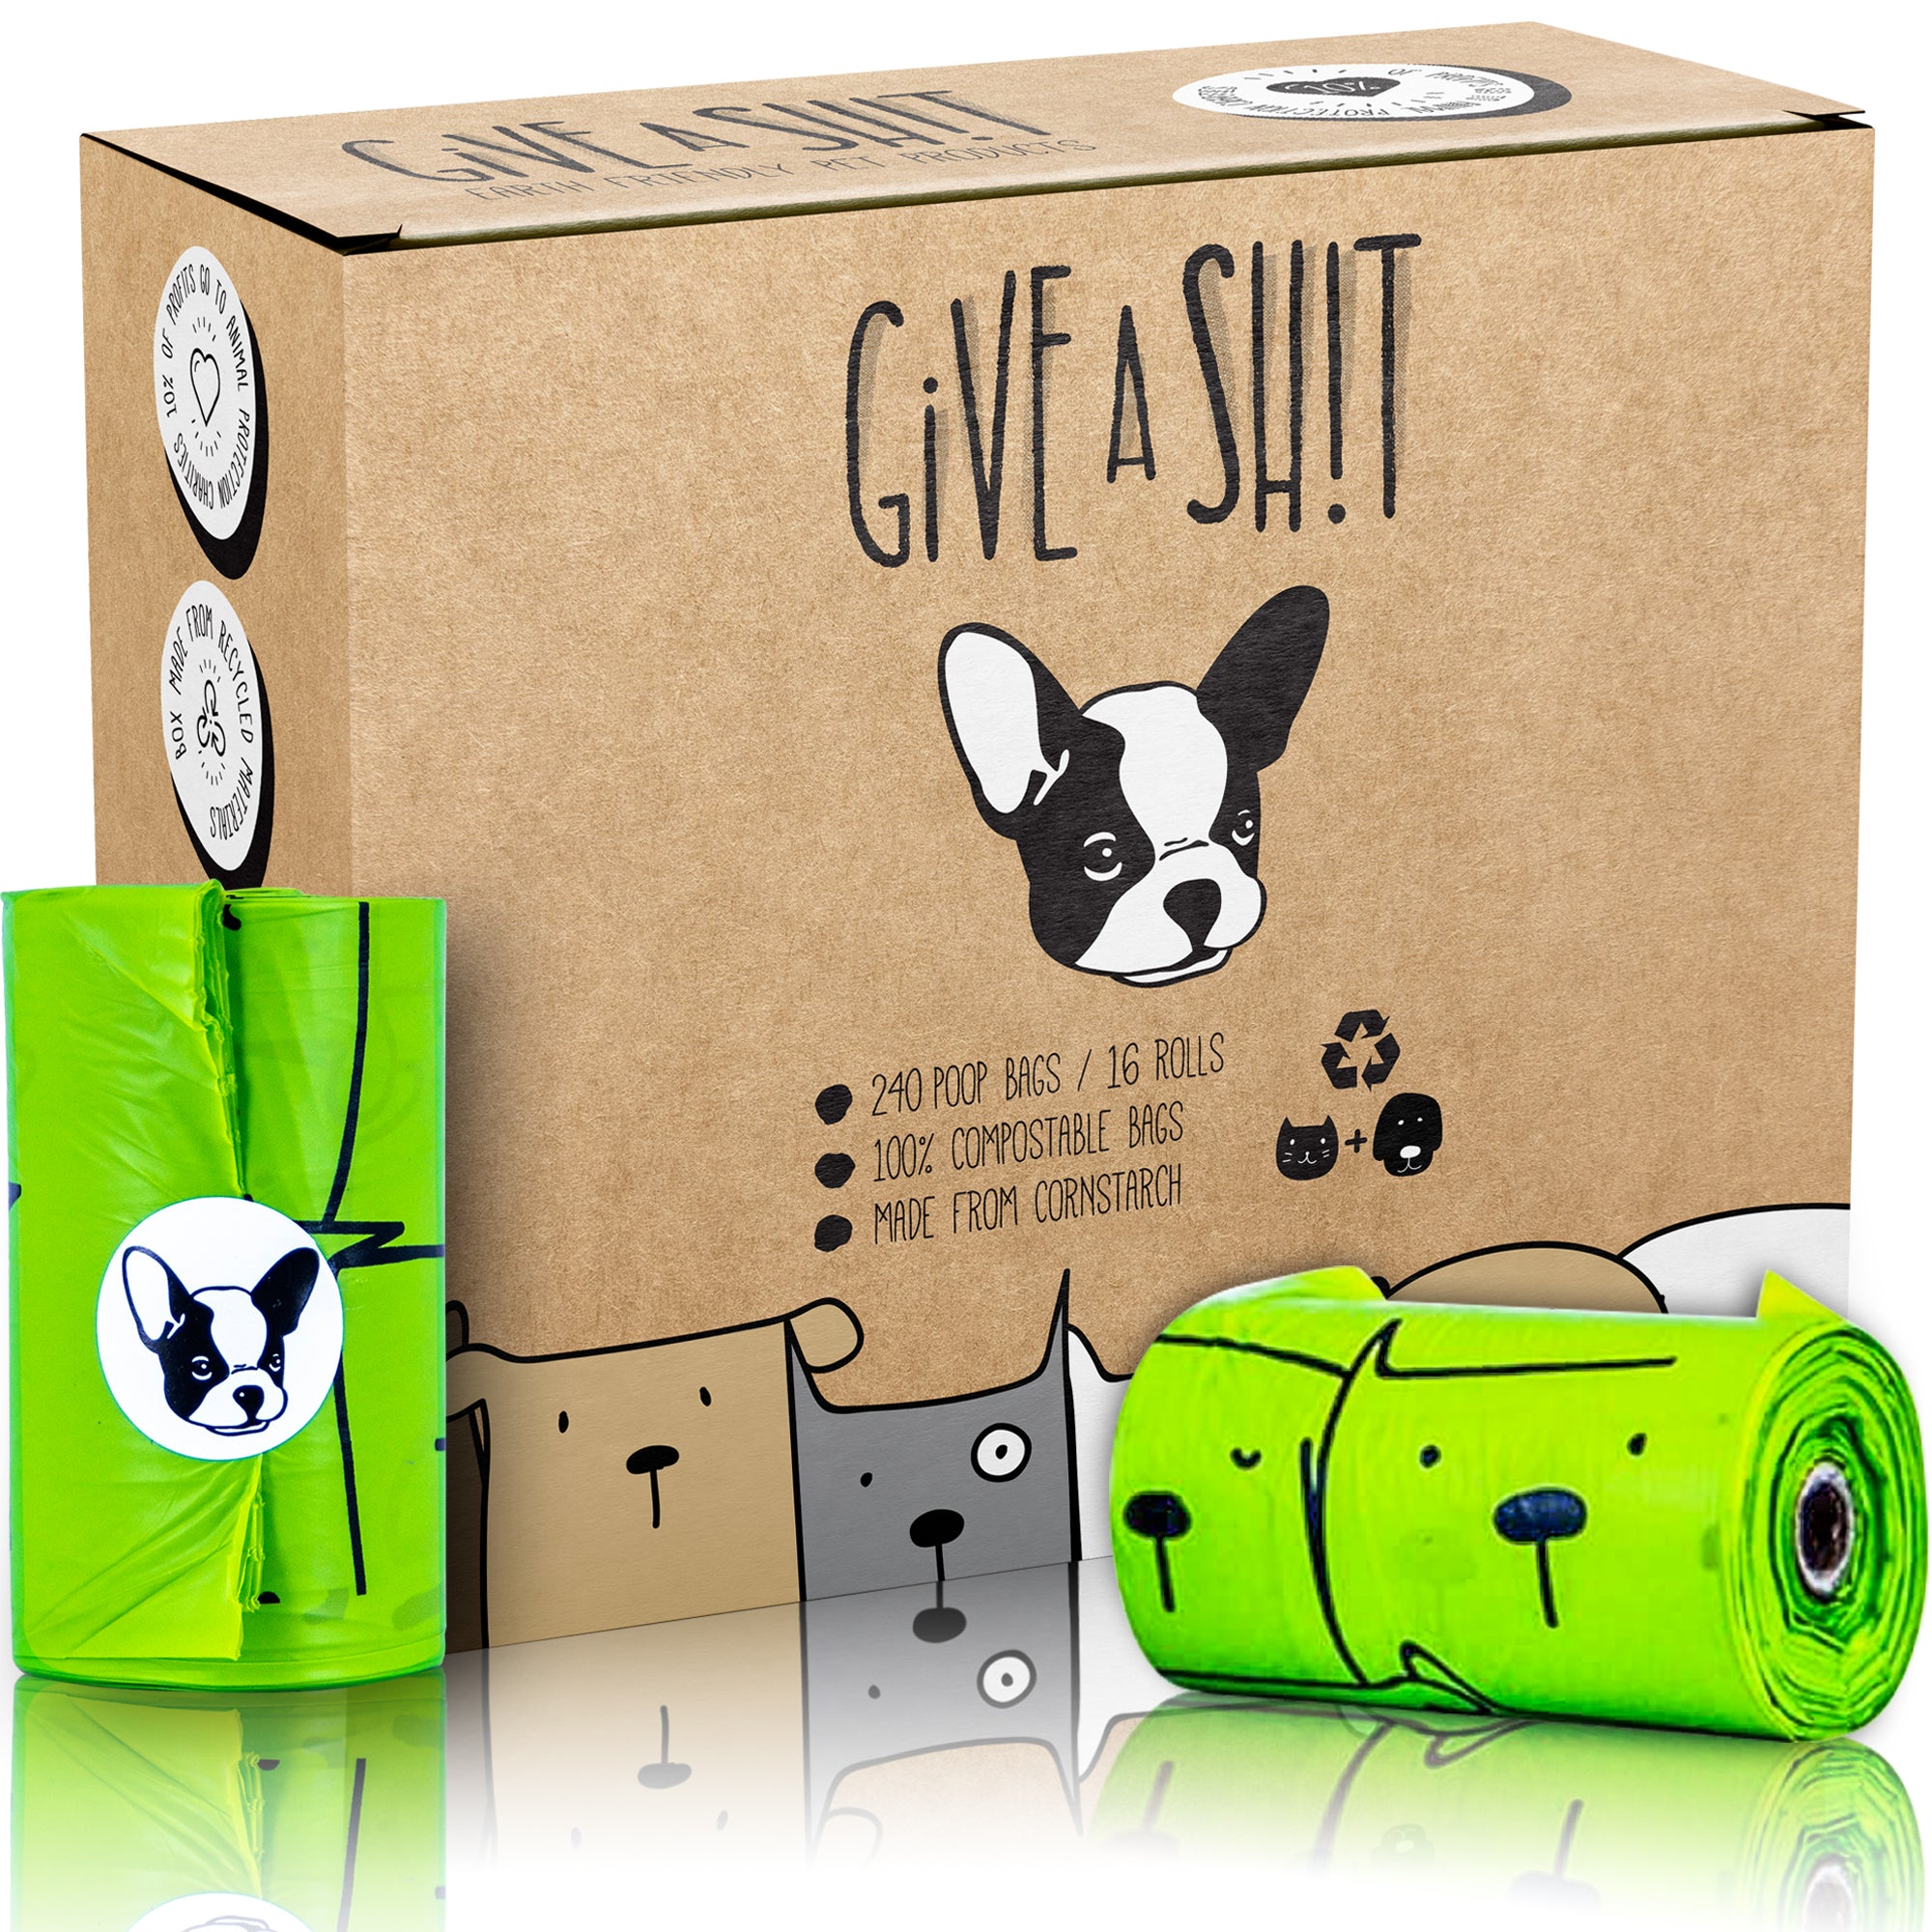 Sustainable dog bags for poop